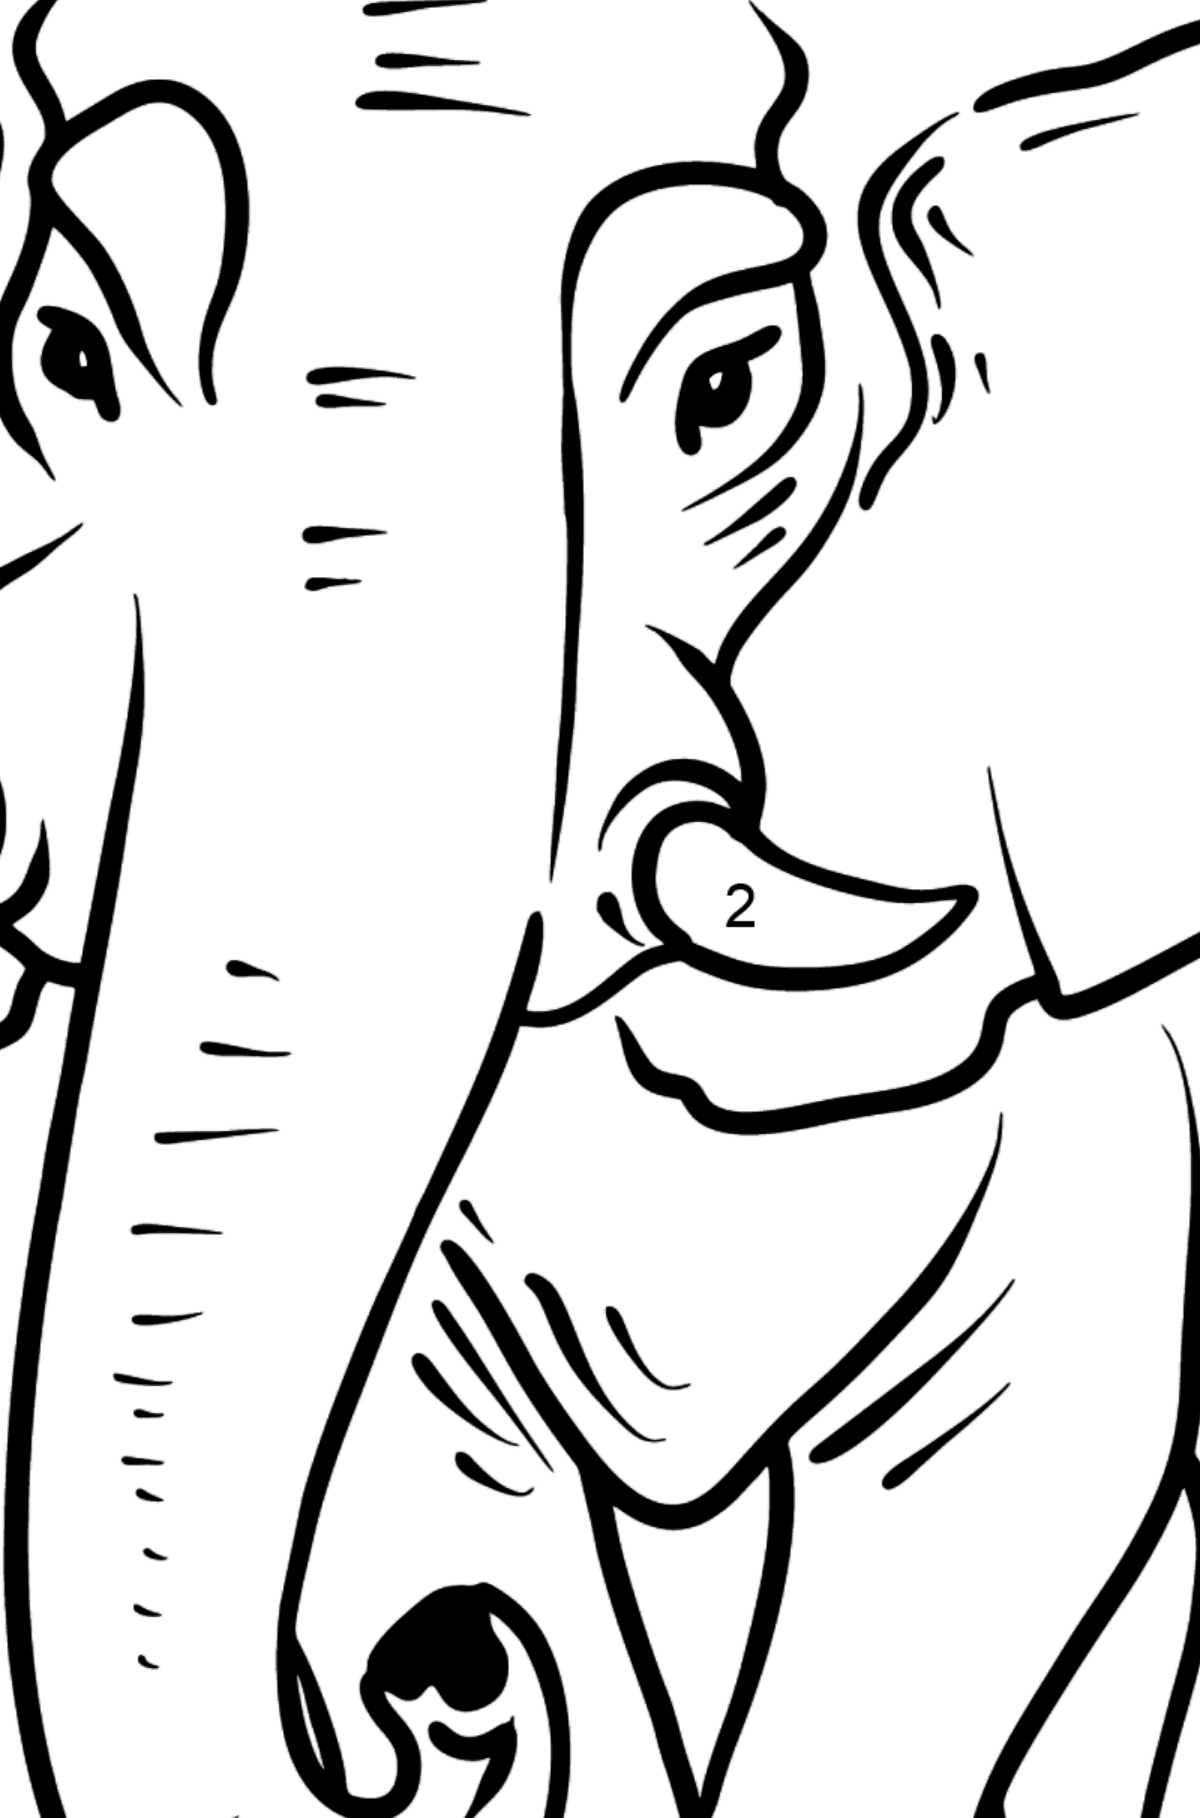 Elephant coloring page - Coloring by Numbers for Kids